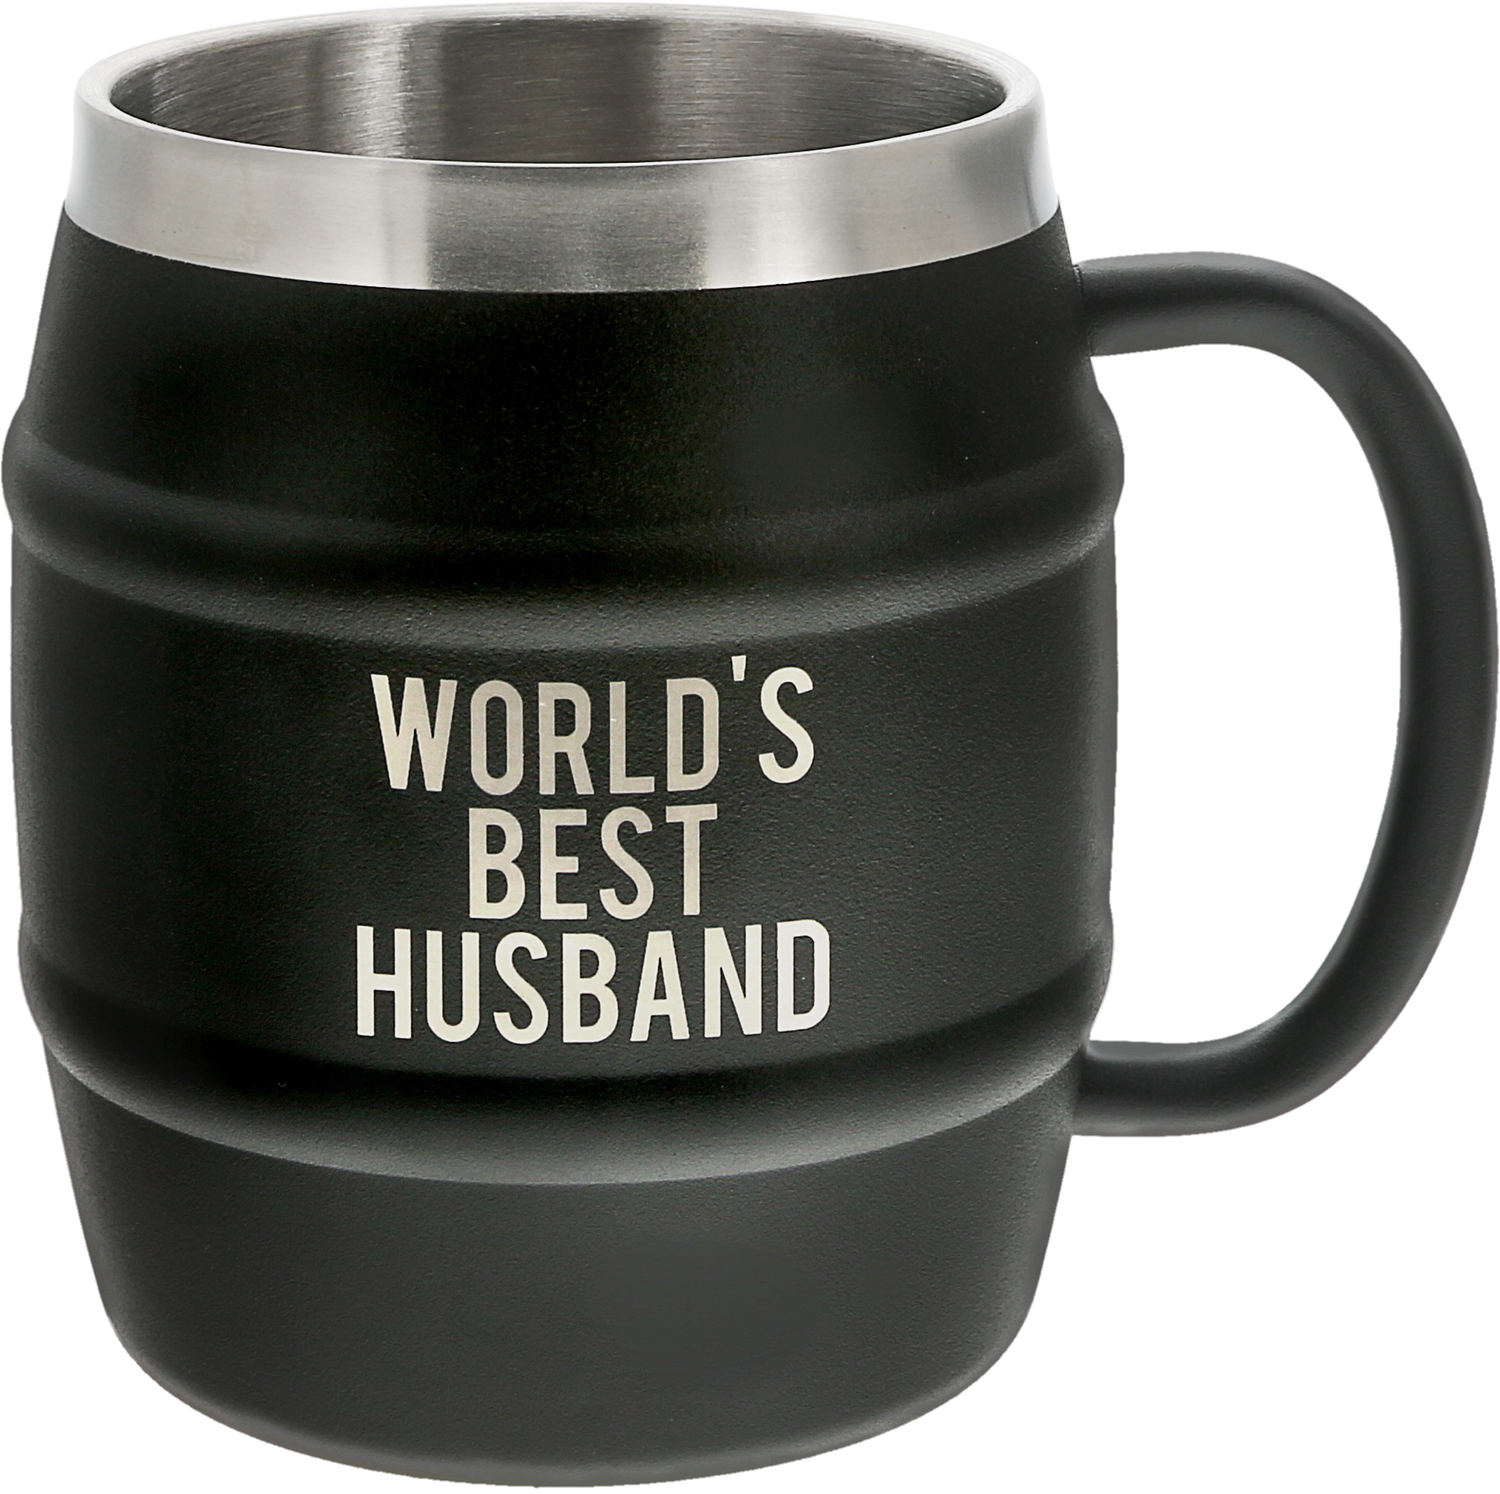 Husband by Man Made - Husband - 15 oz Stainless Steel Double Wall Stein